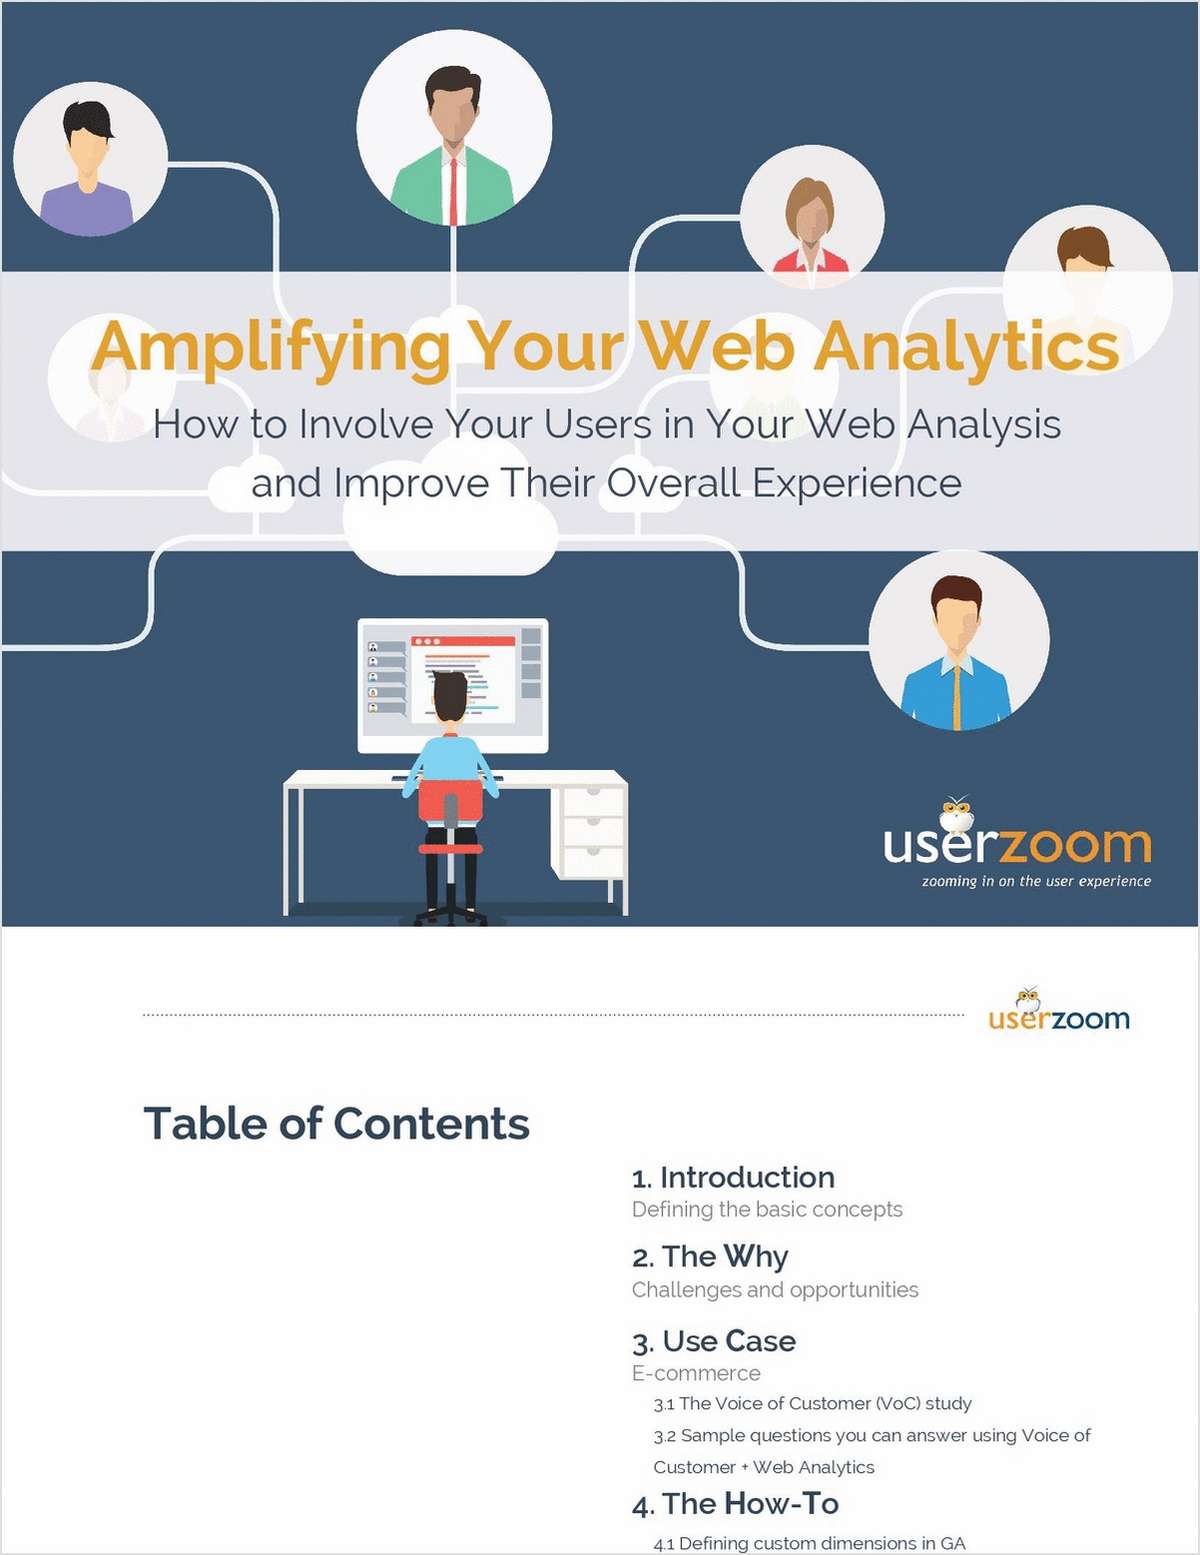 Ebook Download: Amplifying Your Web Analytics with Voice of the Customer Studies